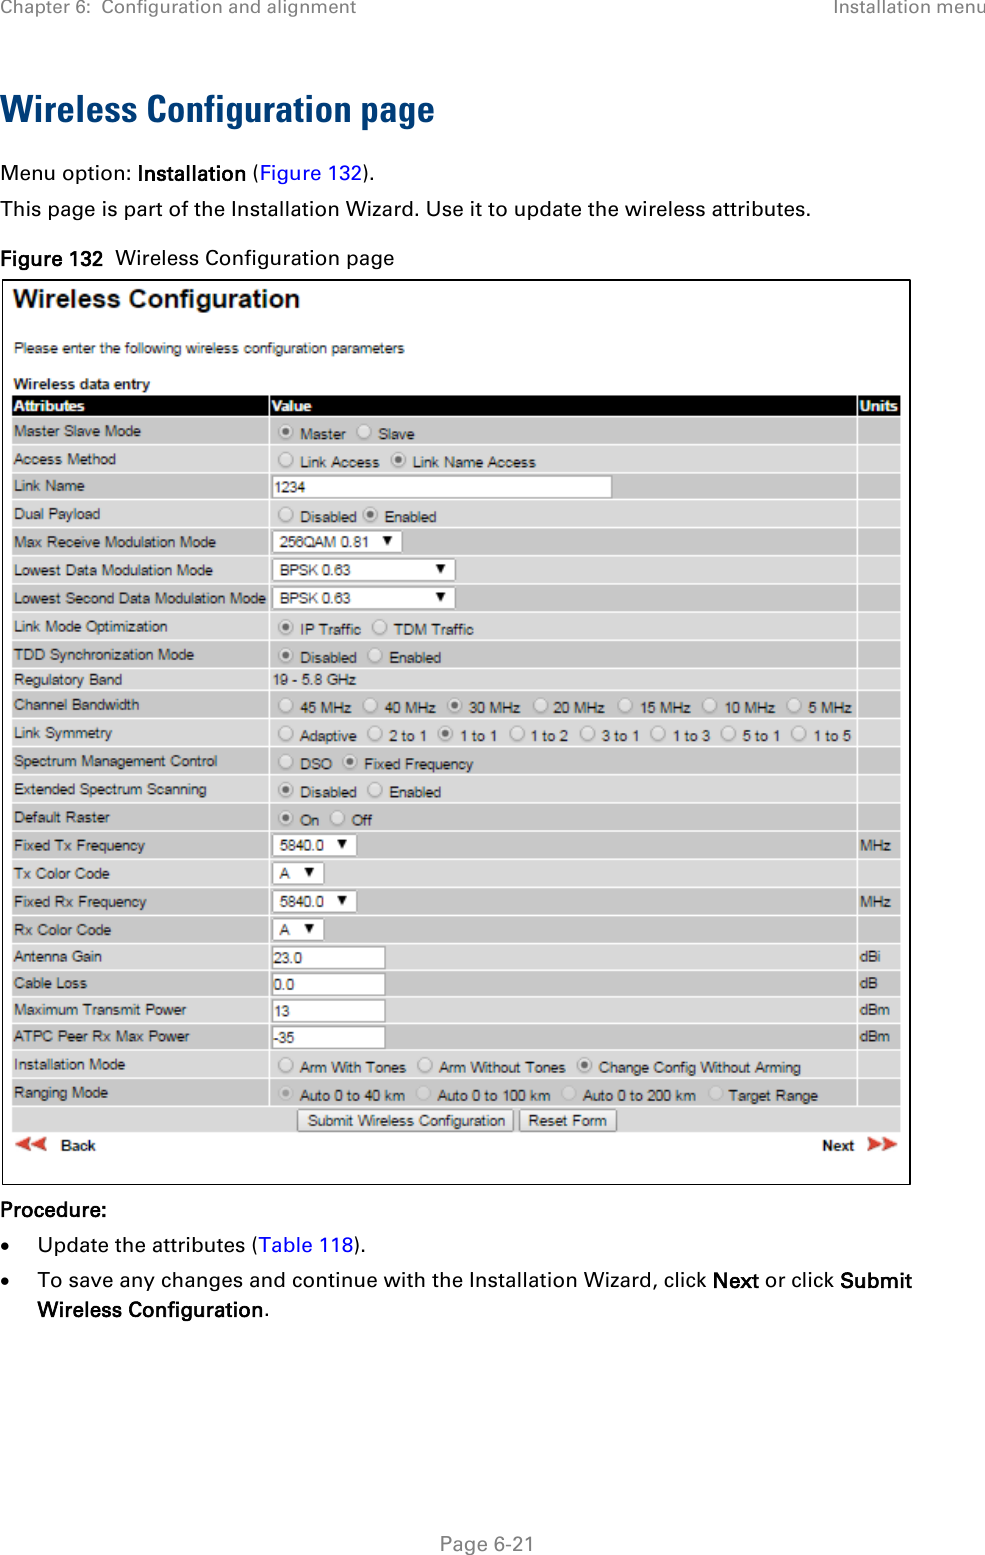 Chapter 6:  Configuration and alignment Installation menu  Wireless Configuration page Menu option: Installation (Figure 132). This page is part of the Installation Wizard. Use it to update the wireless attributes. Figure 132  Wireless Configuration page    Procedure: • Update the attributes (Table 118). • To save any changes and continue with the Installation Wizard, click Next or click Submit Wireless Configuration.   Page 6-21 